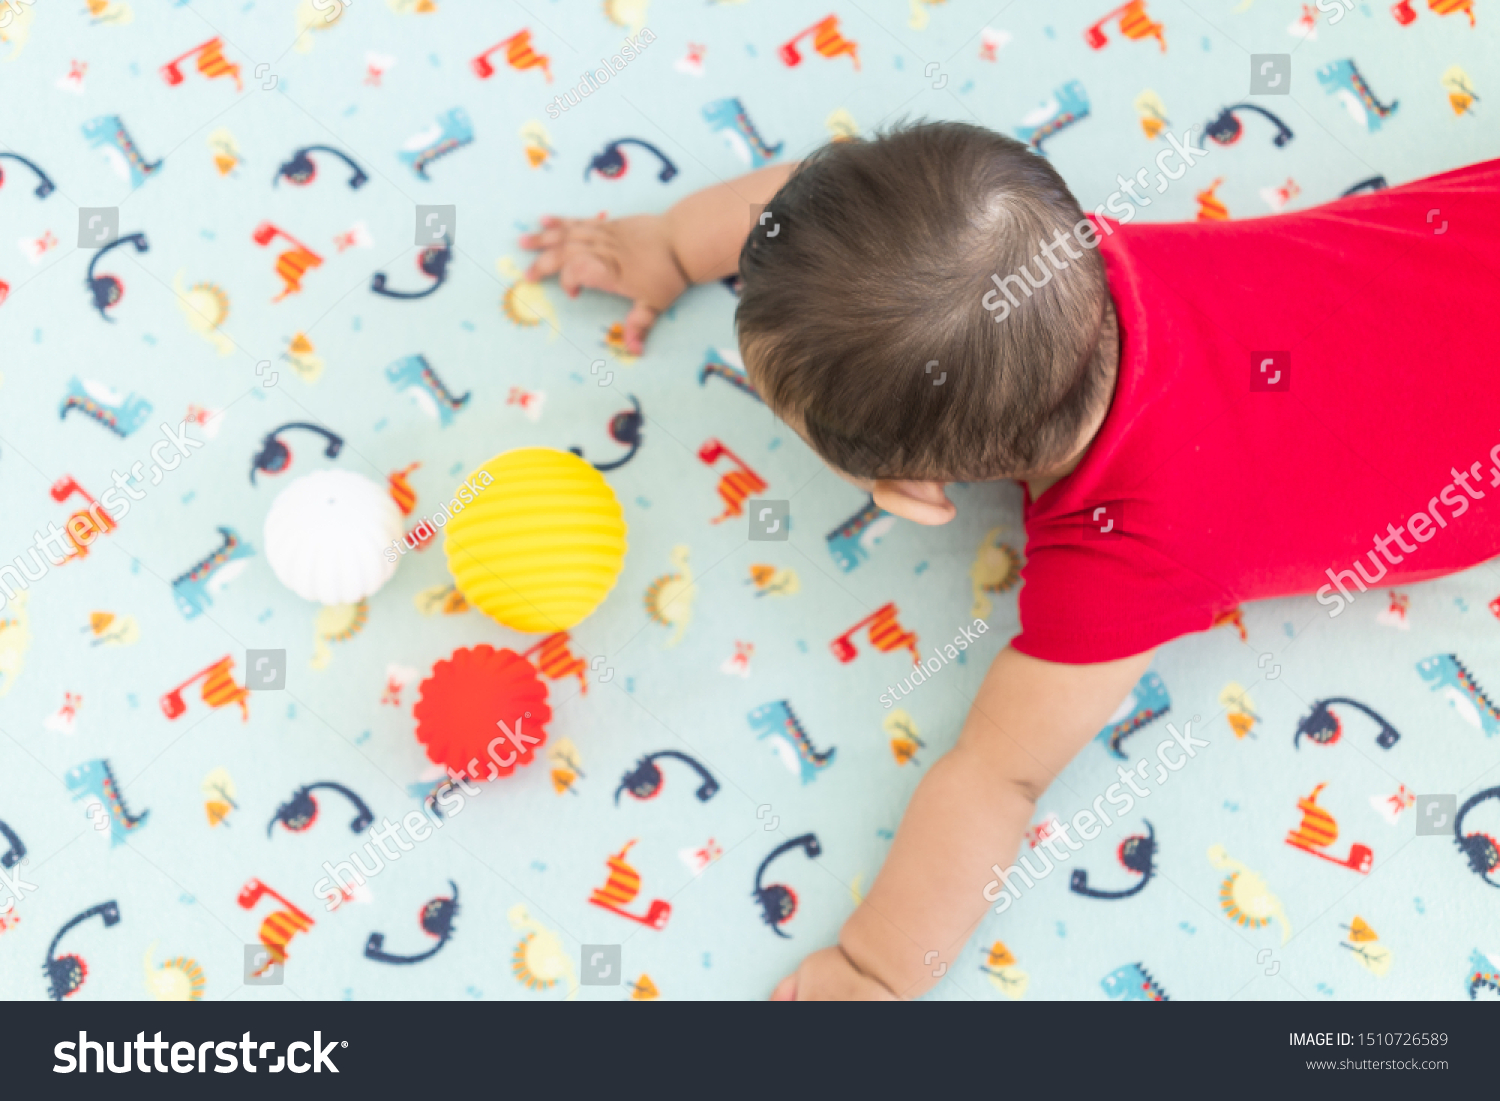 Baby playing with colorful toy rubber balls in the crib in a bright room. Child wearing a red bodysuit, laying on playful dinosaur crib sheet. #1510726589